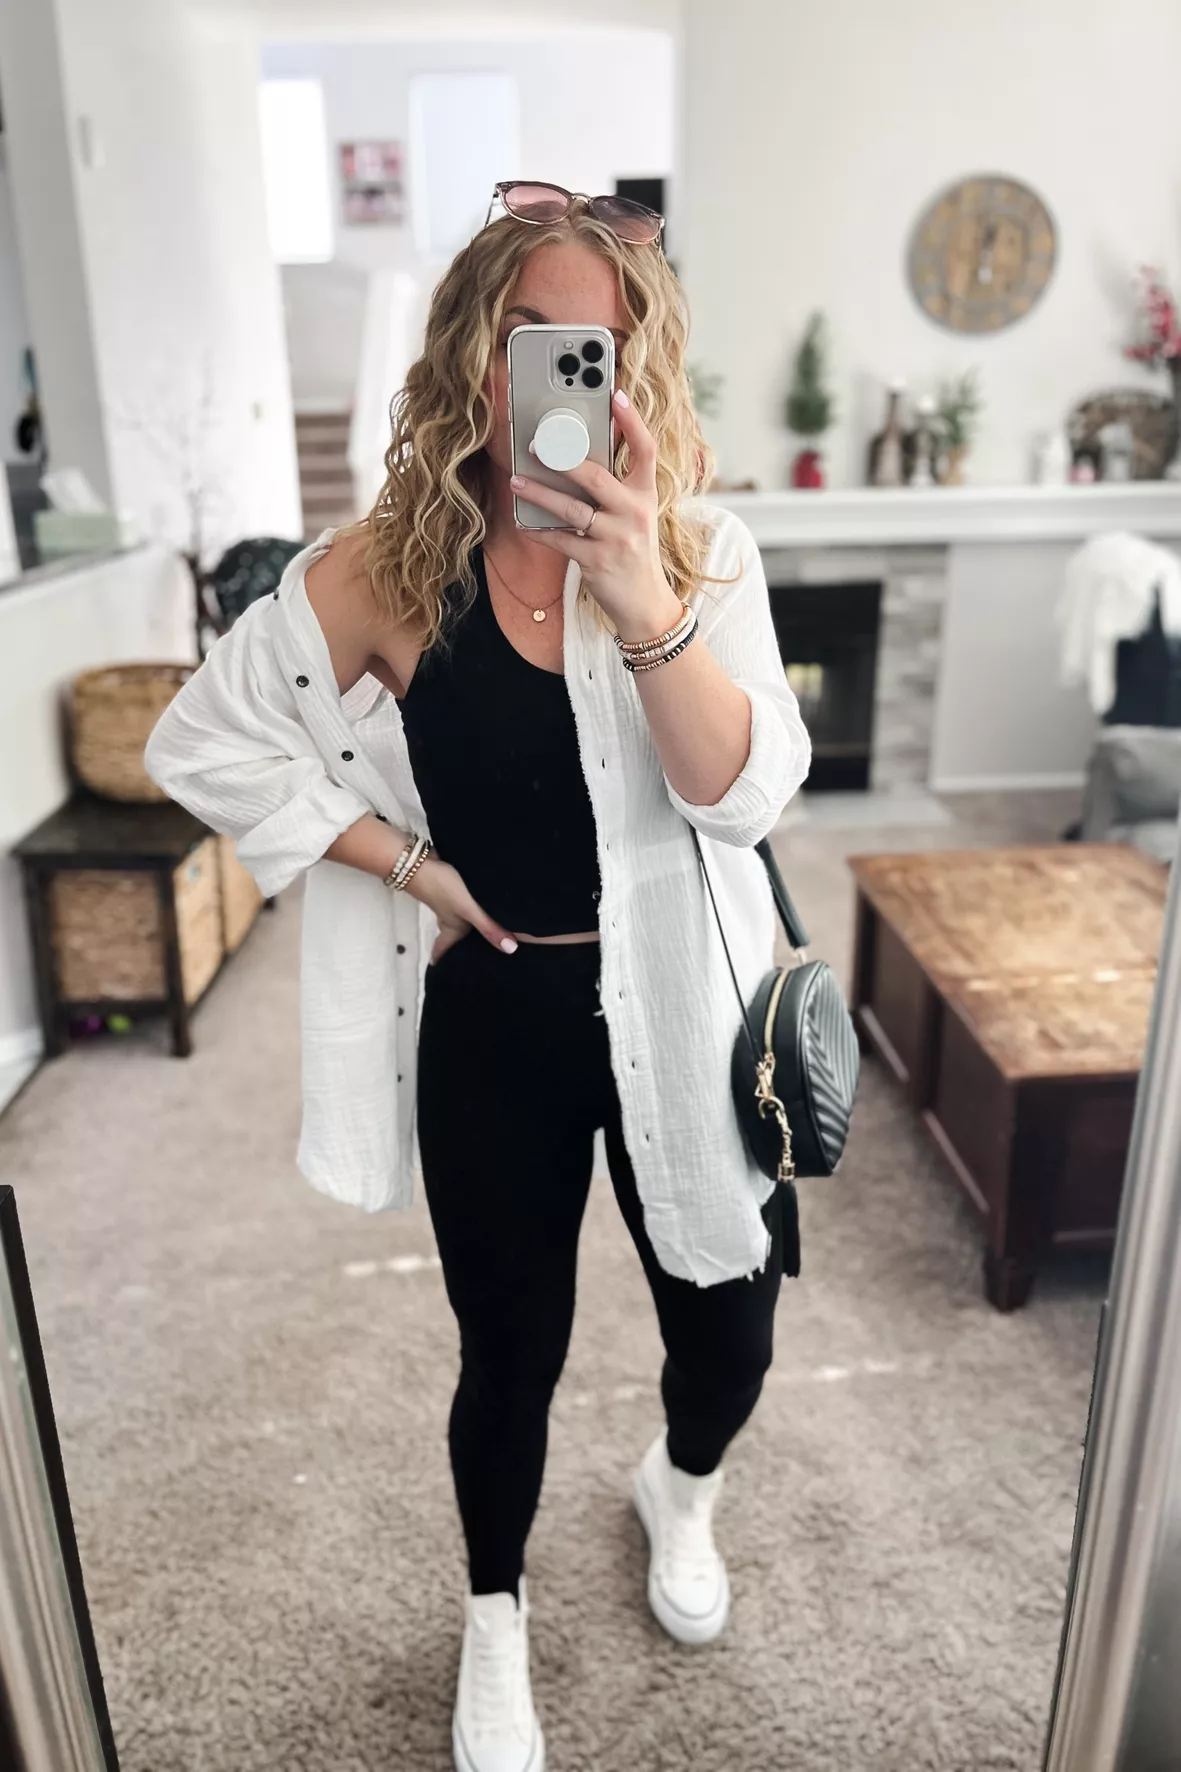 White Leggings Spring Outfits (4 ideas & outfits)